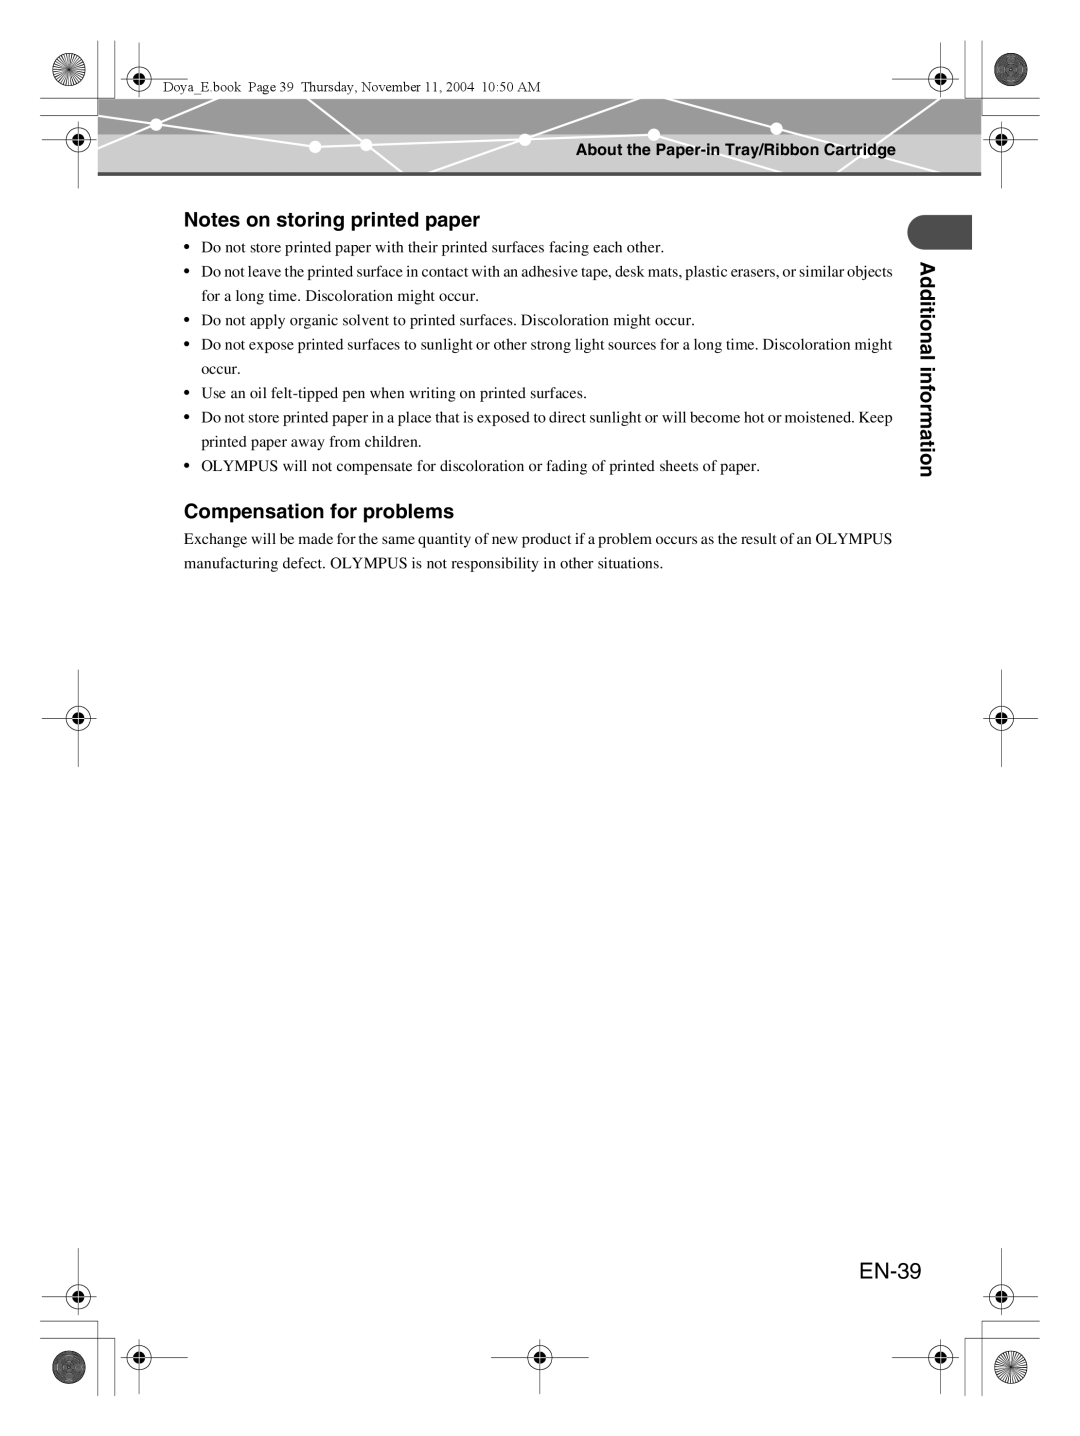 Olympus P-S100 user manual EN-39, Notes on storing printed paper, Compensation for problems, Additional information 